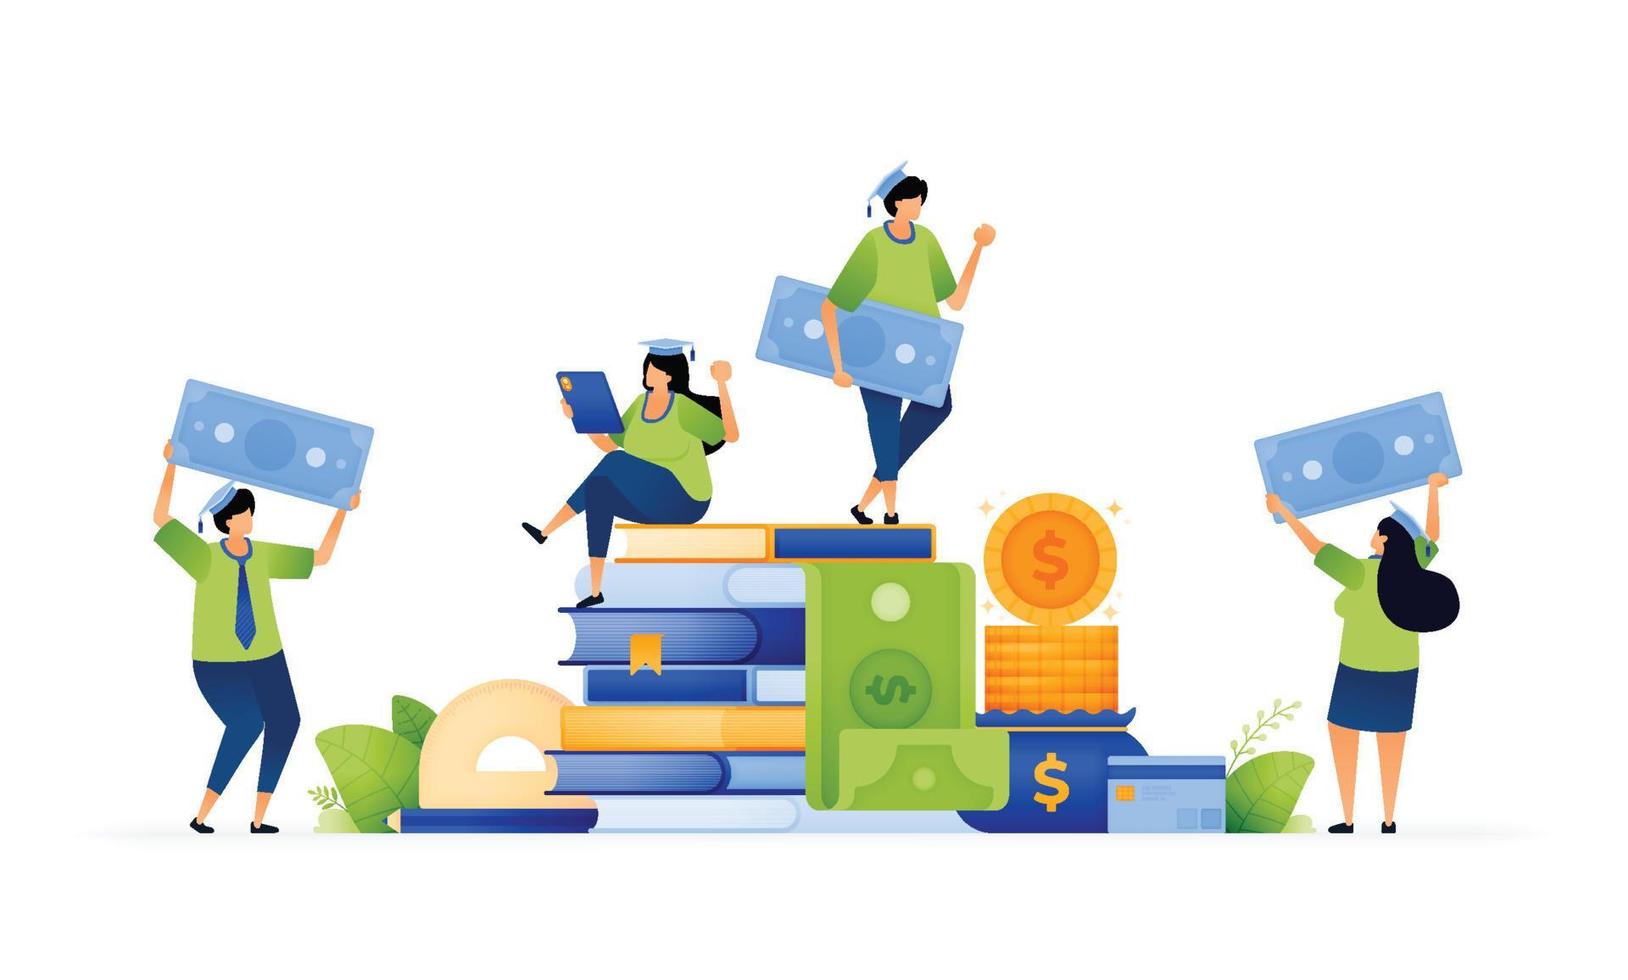 Vector illustration of scholarships and education with financial support opportunities. Investing in knowledge. Scholarships for students. Can use for ad, poster, campaign, website, apps, social media